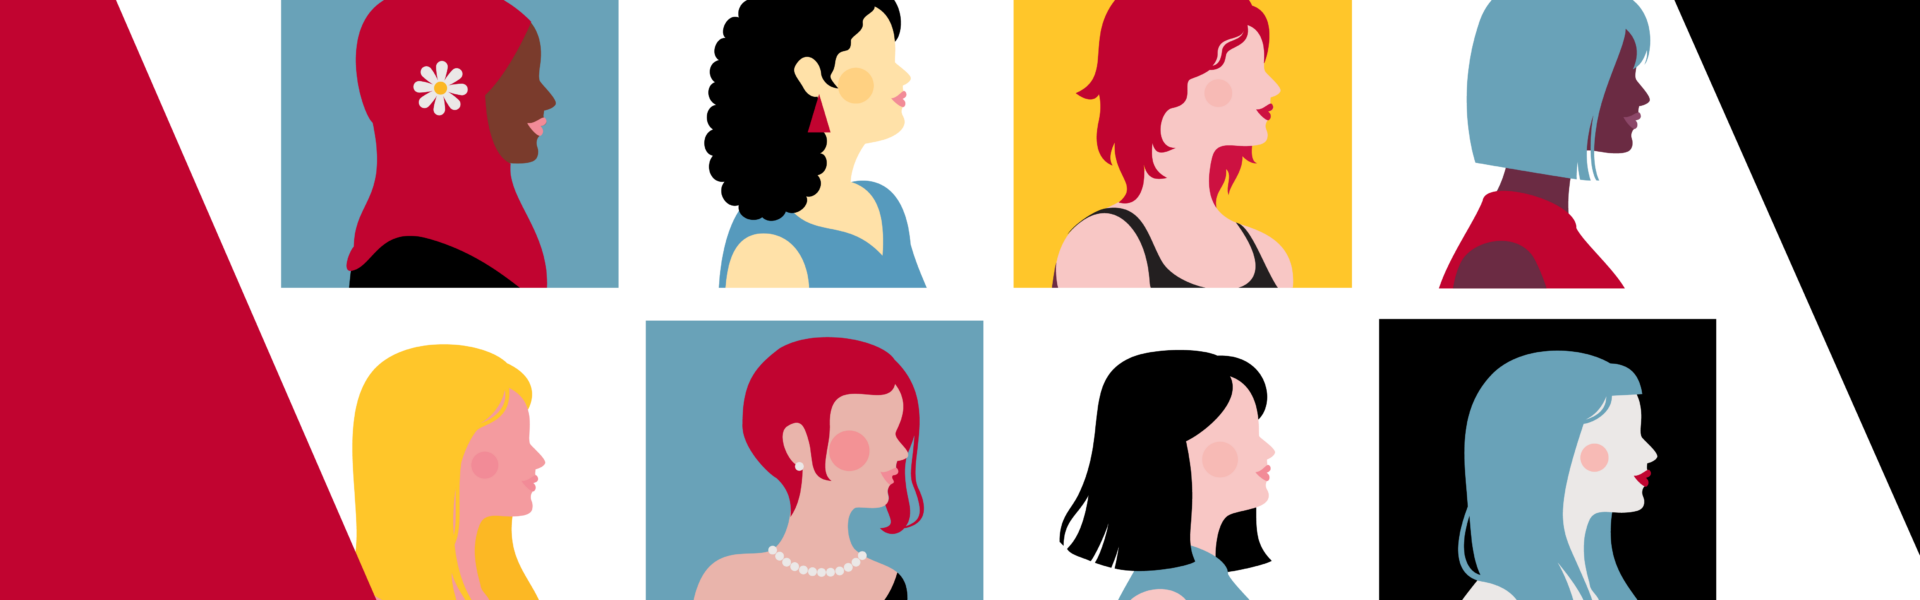 A graphic showing the silhouetted heads of 8 women